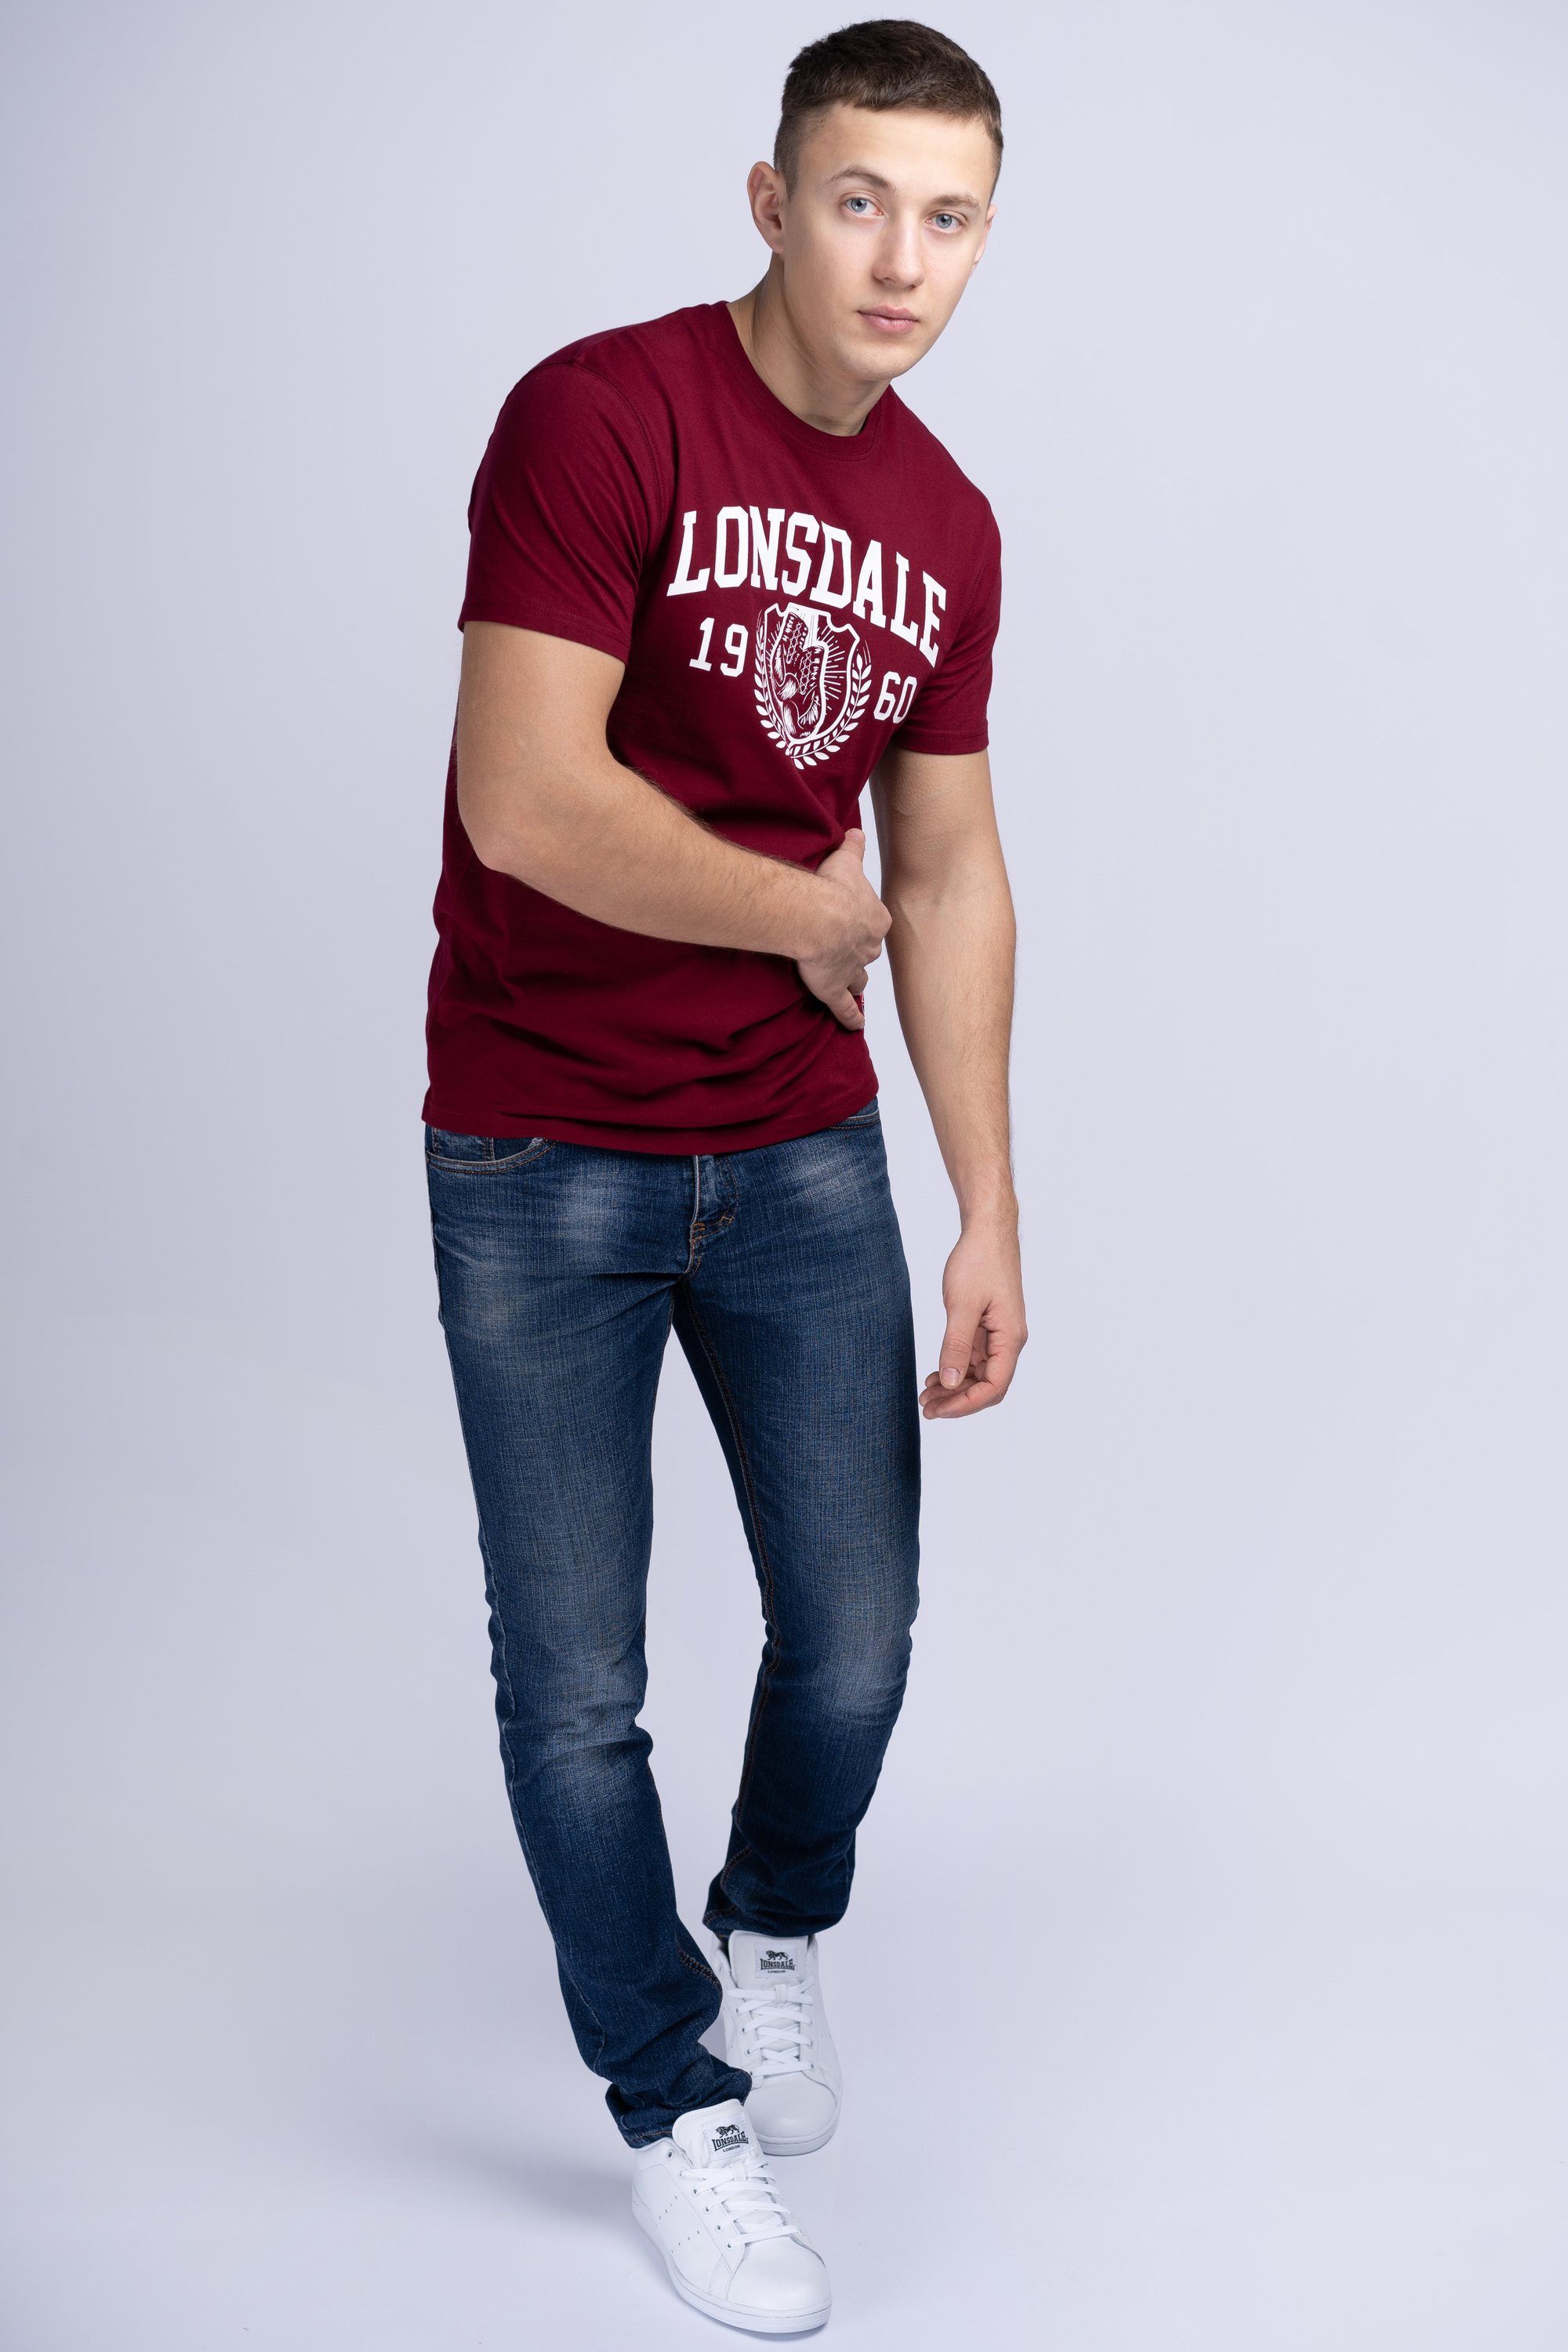 STAXIGOE Lonsdale T-Shirt Oxblood/White